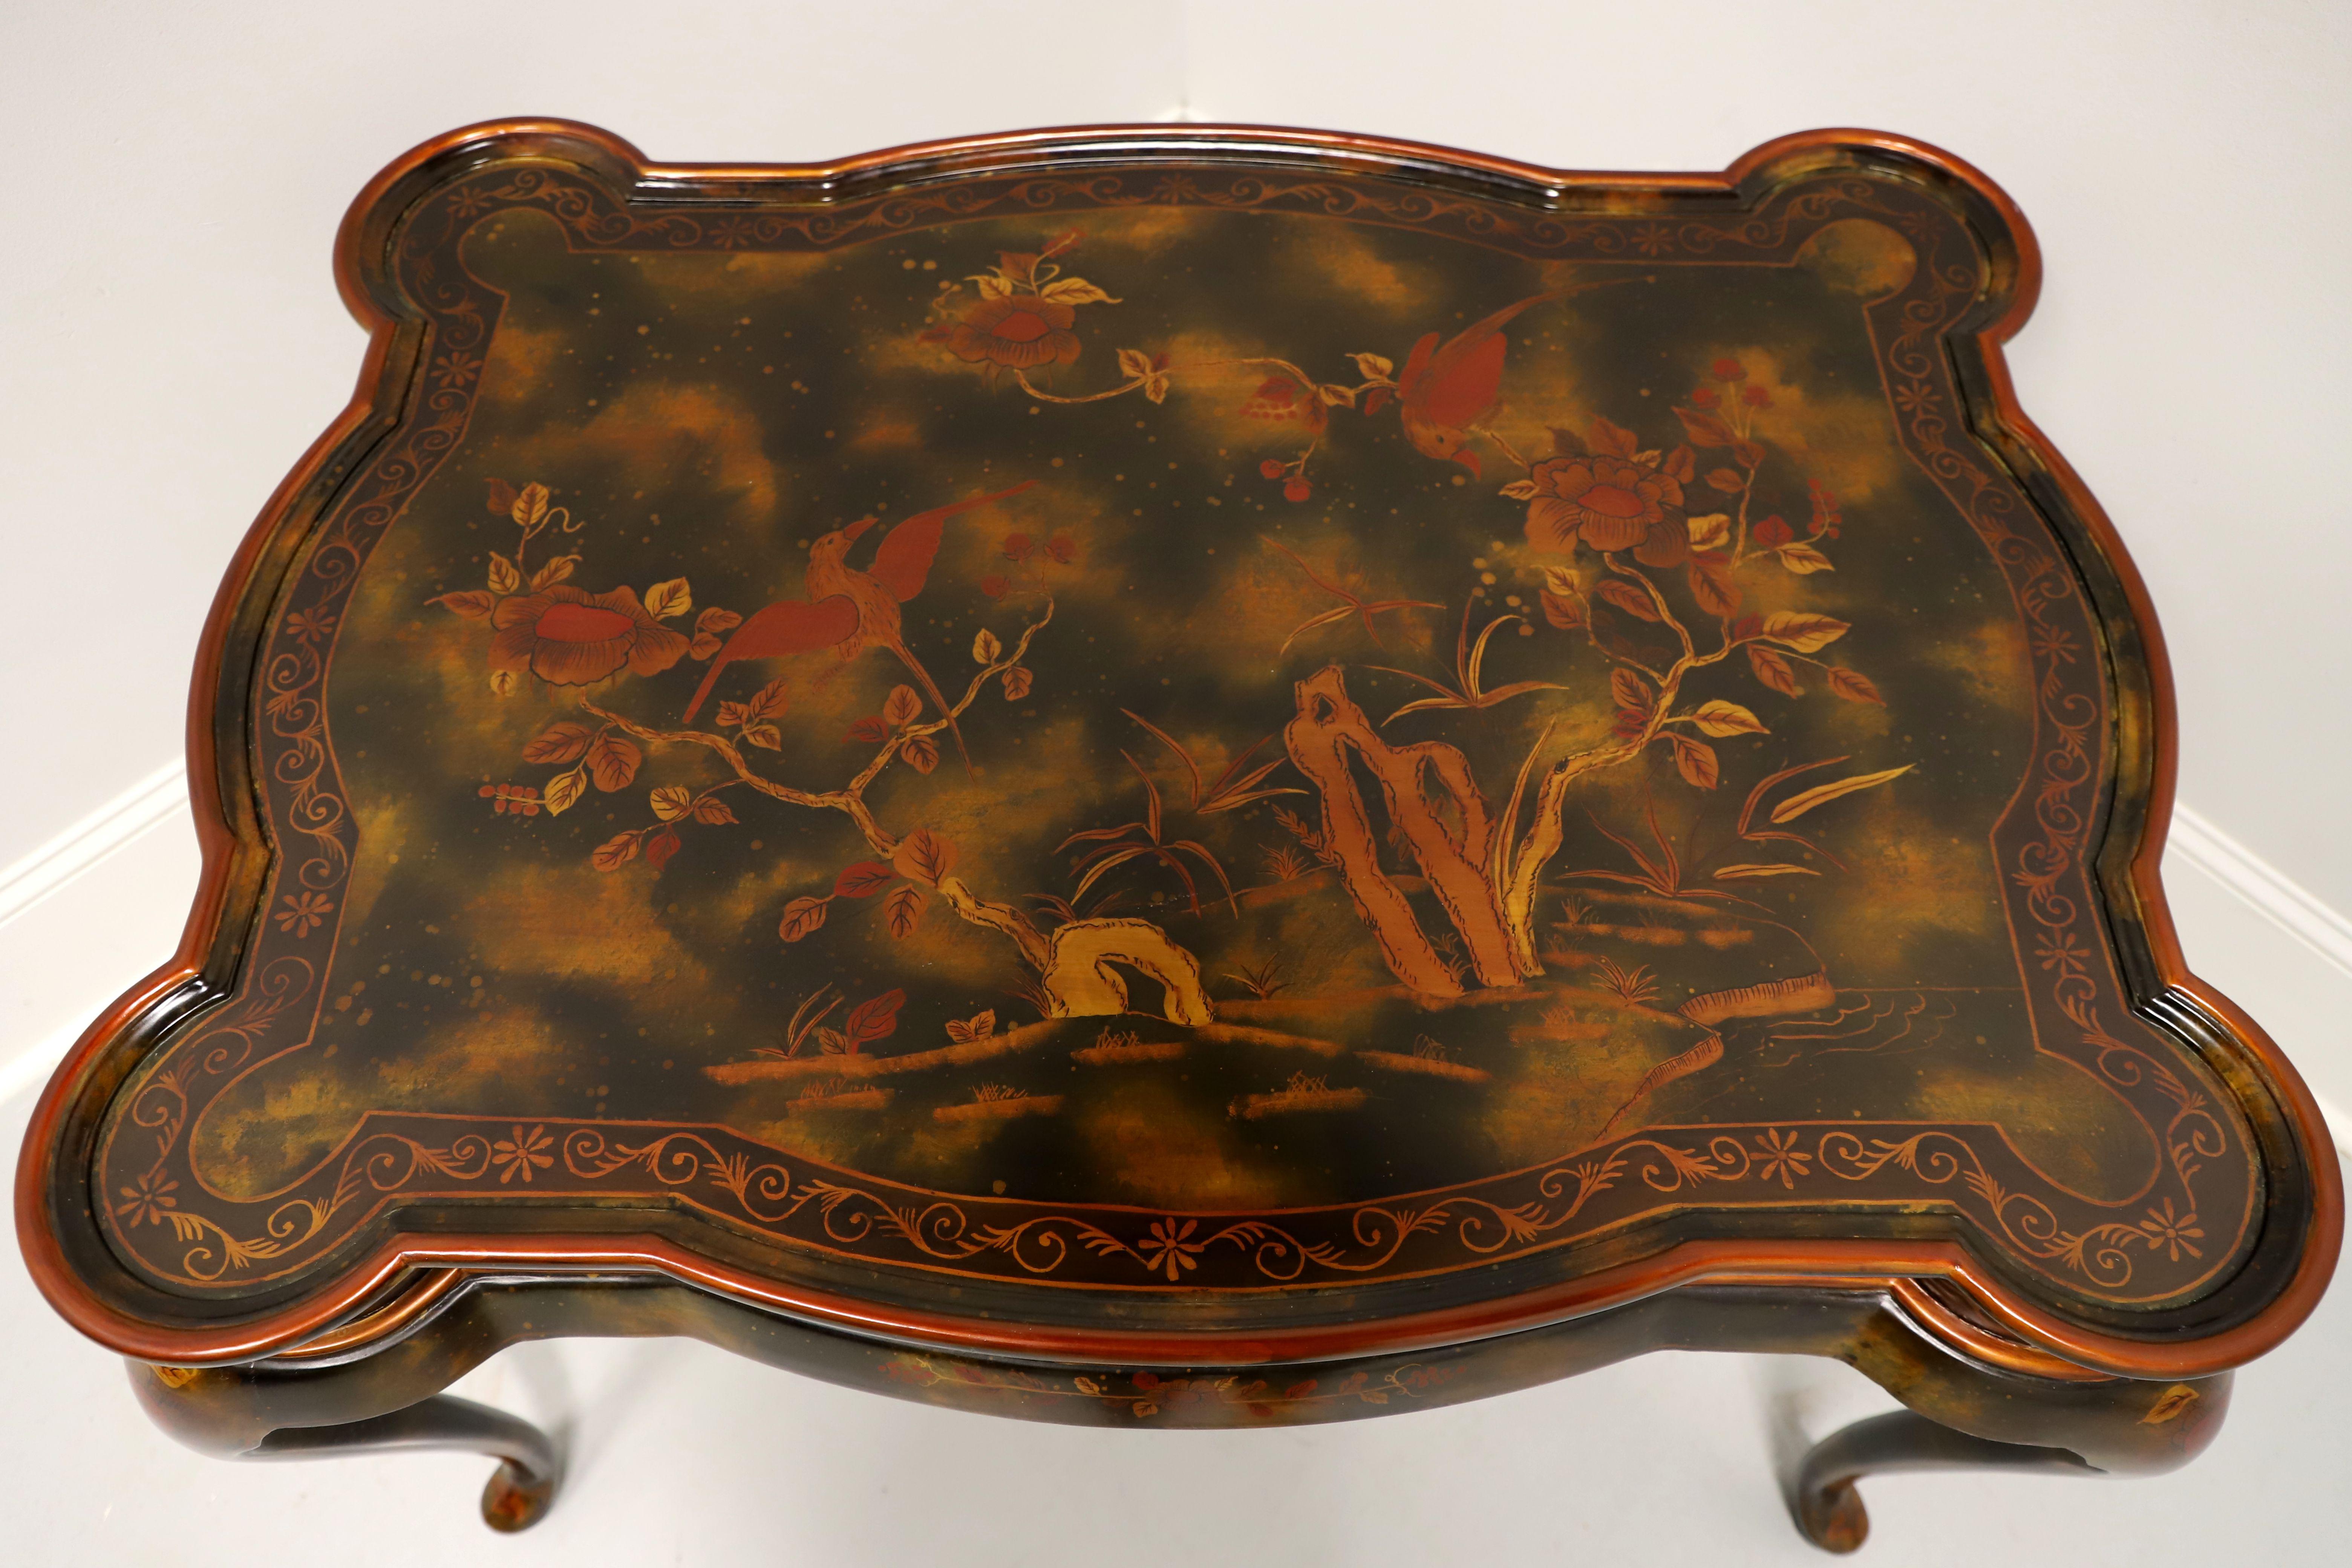 An Asian Chinoiserie style cocktail table by Maitland Smith. Solid hardwood, unique curvature design, hand painted throughout with Chinoiserie scenes in shades of black, red & gold, low gallery edge to top, rounded flair to apron, cabriole legs, and